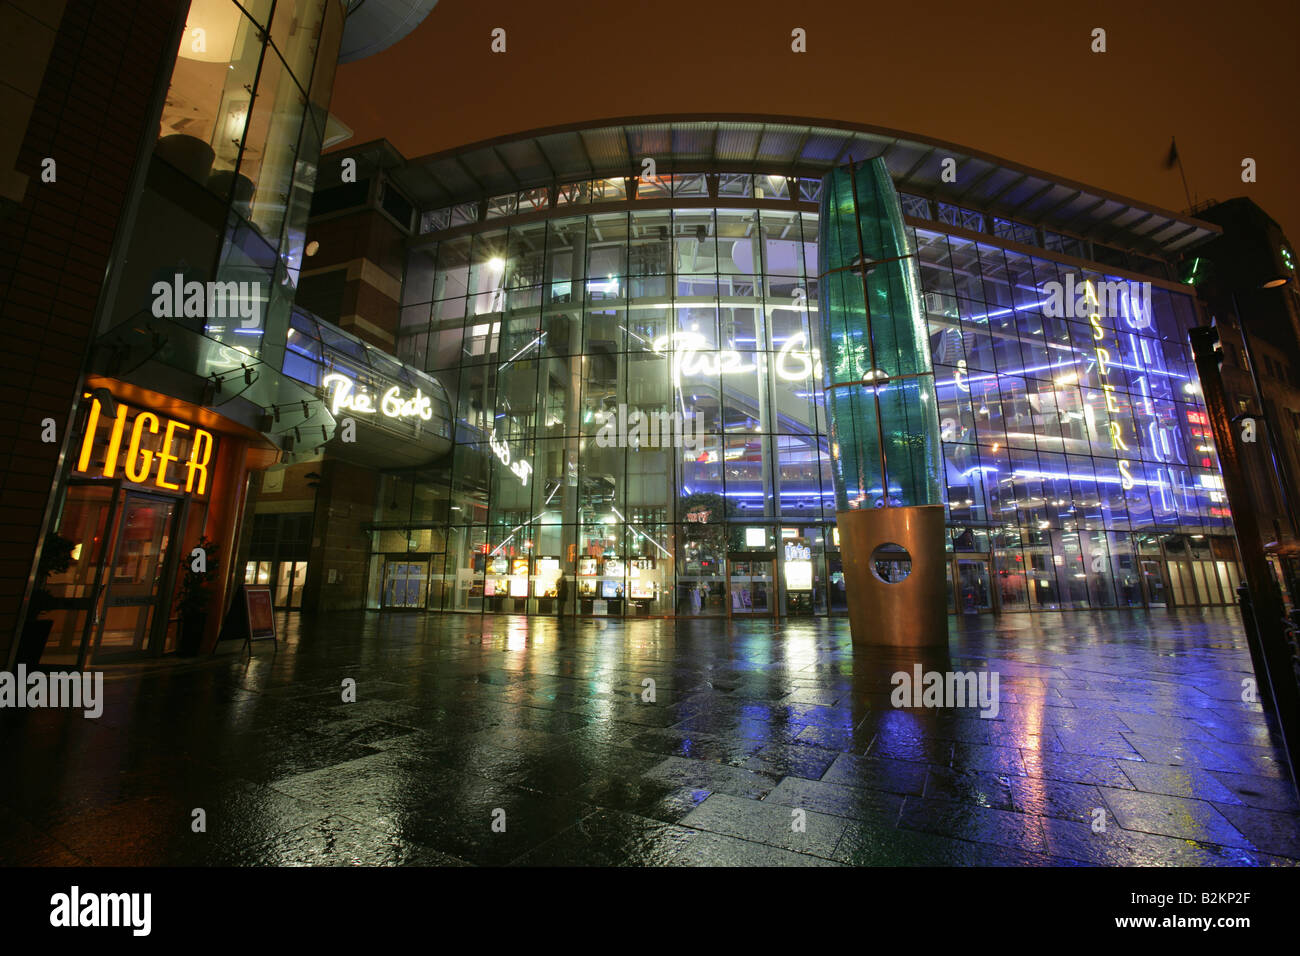 City of Newcastle, England. A rainy night view of The Gate leisure, retail and entertainment complex on Newgate Street. Stock Photo